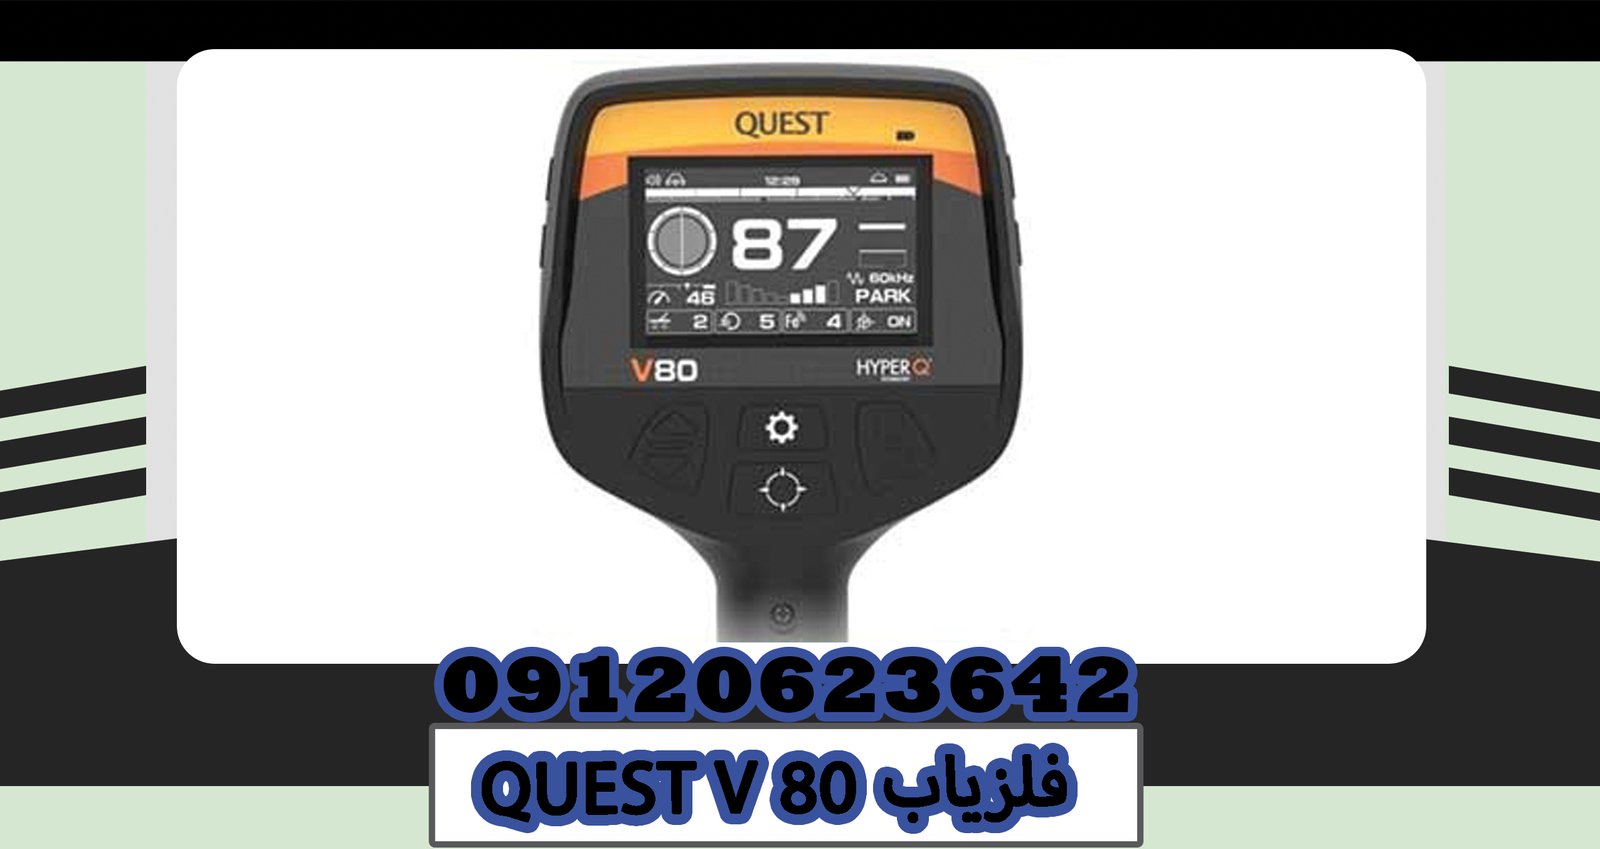 QUEST V80